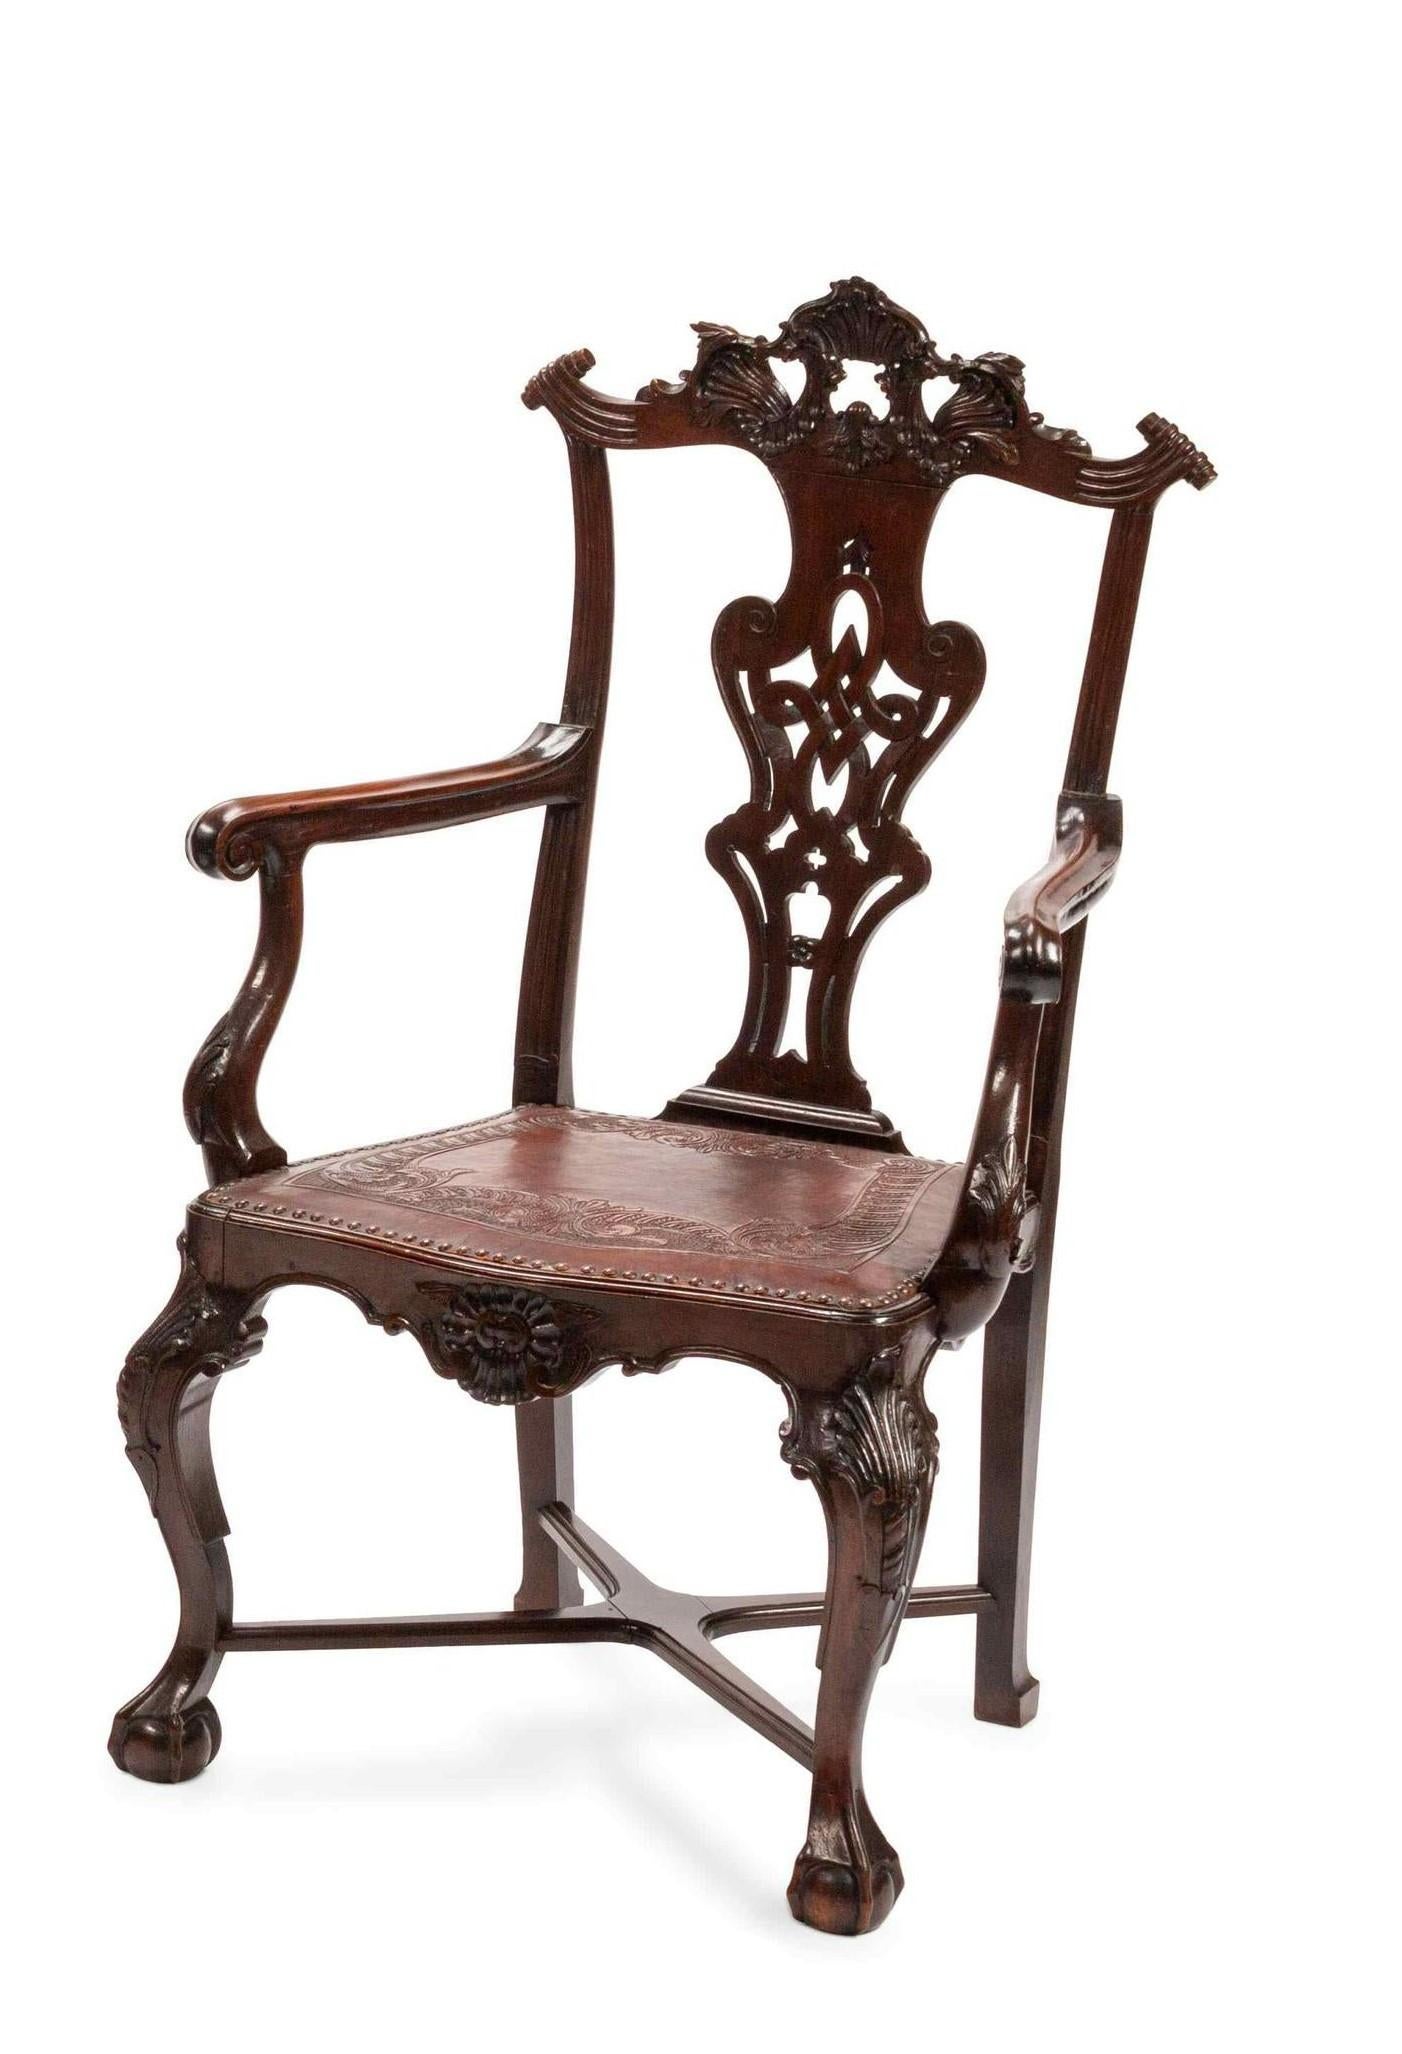 A fine set of eight Portuguese mahogany armchairs, original embossed, tooled and nail studded leather seats, 19th century. A rare find
Measures: Height 43.75 x width 26 x depth 19 inches, 19 inches seat height.
CW4842.